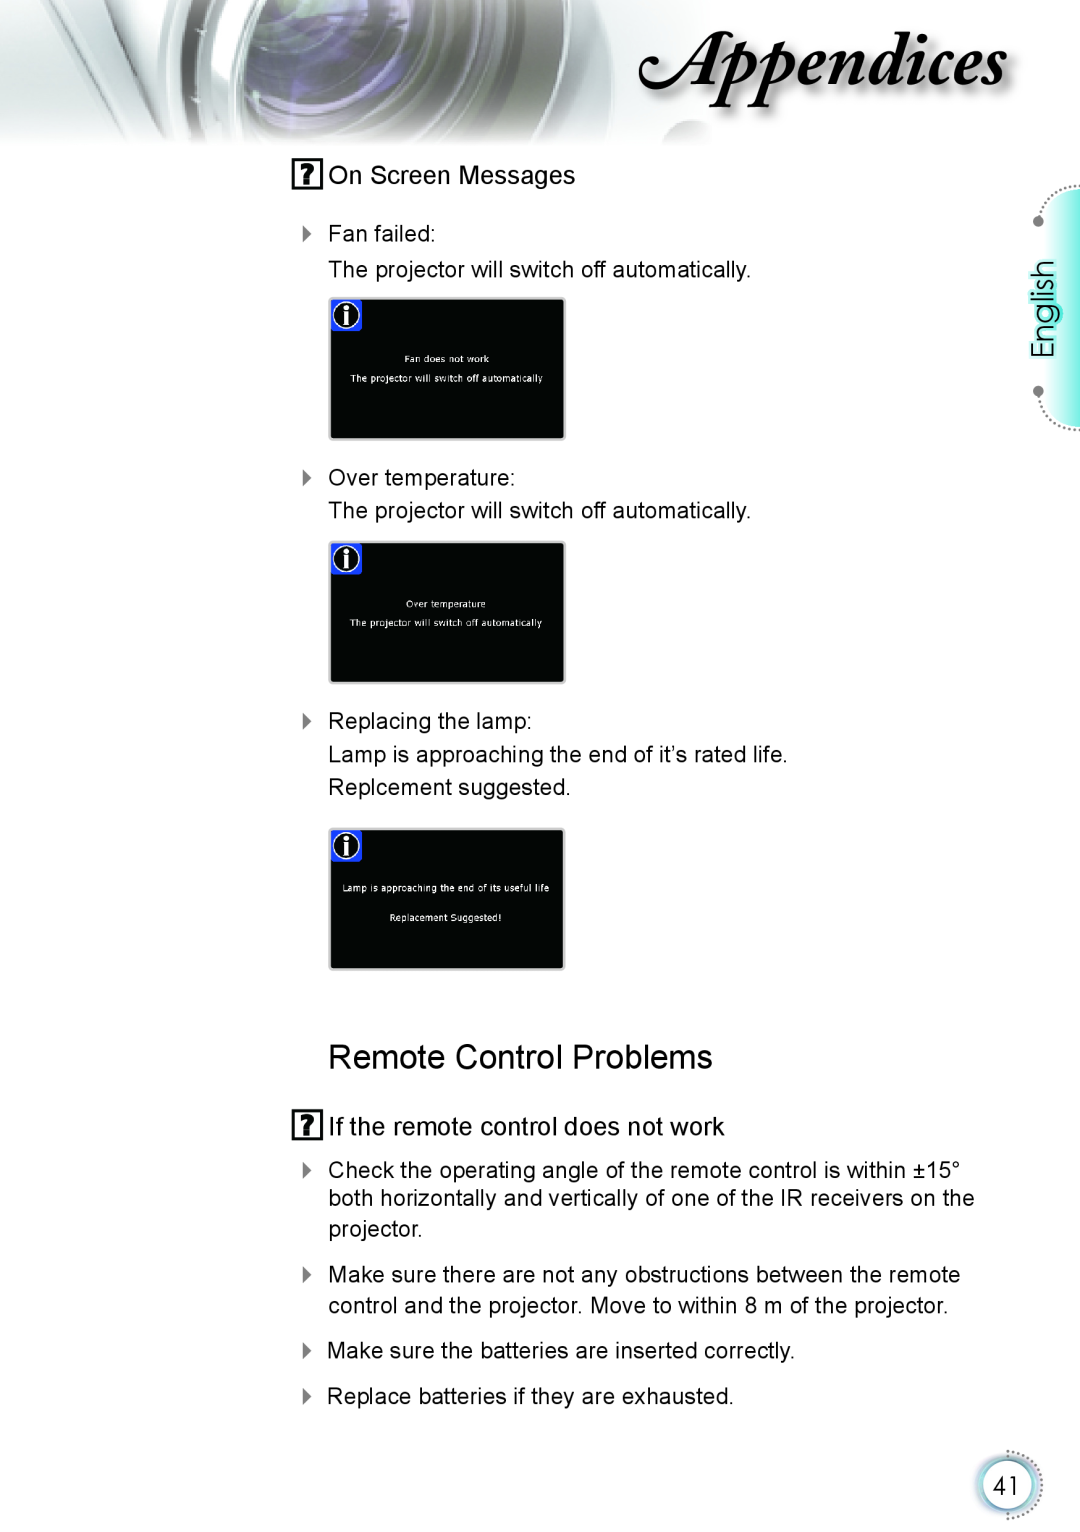 Optoma Technology HD20 manual Remote Control Problems, ppendices, English, On Screen Messages 